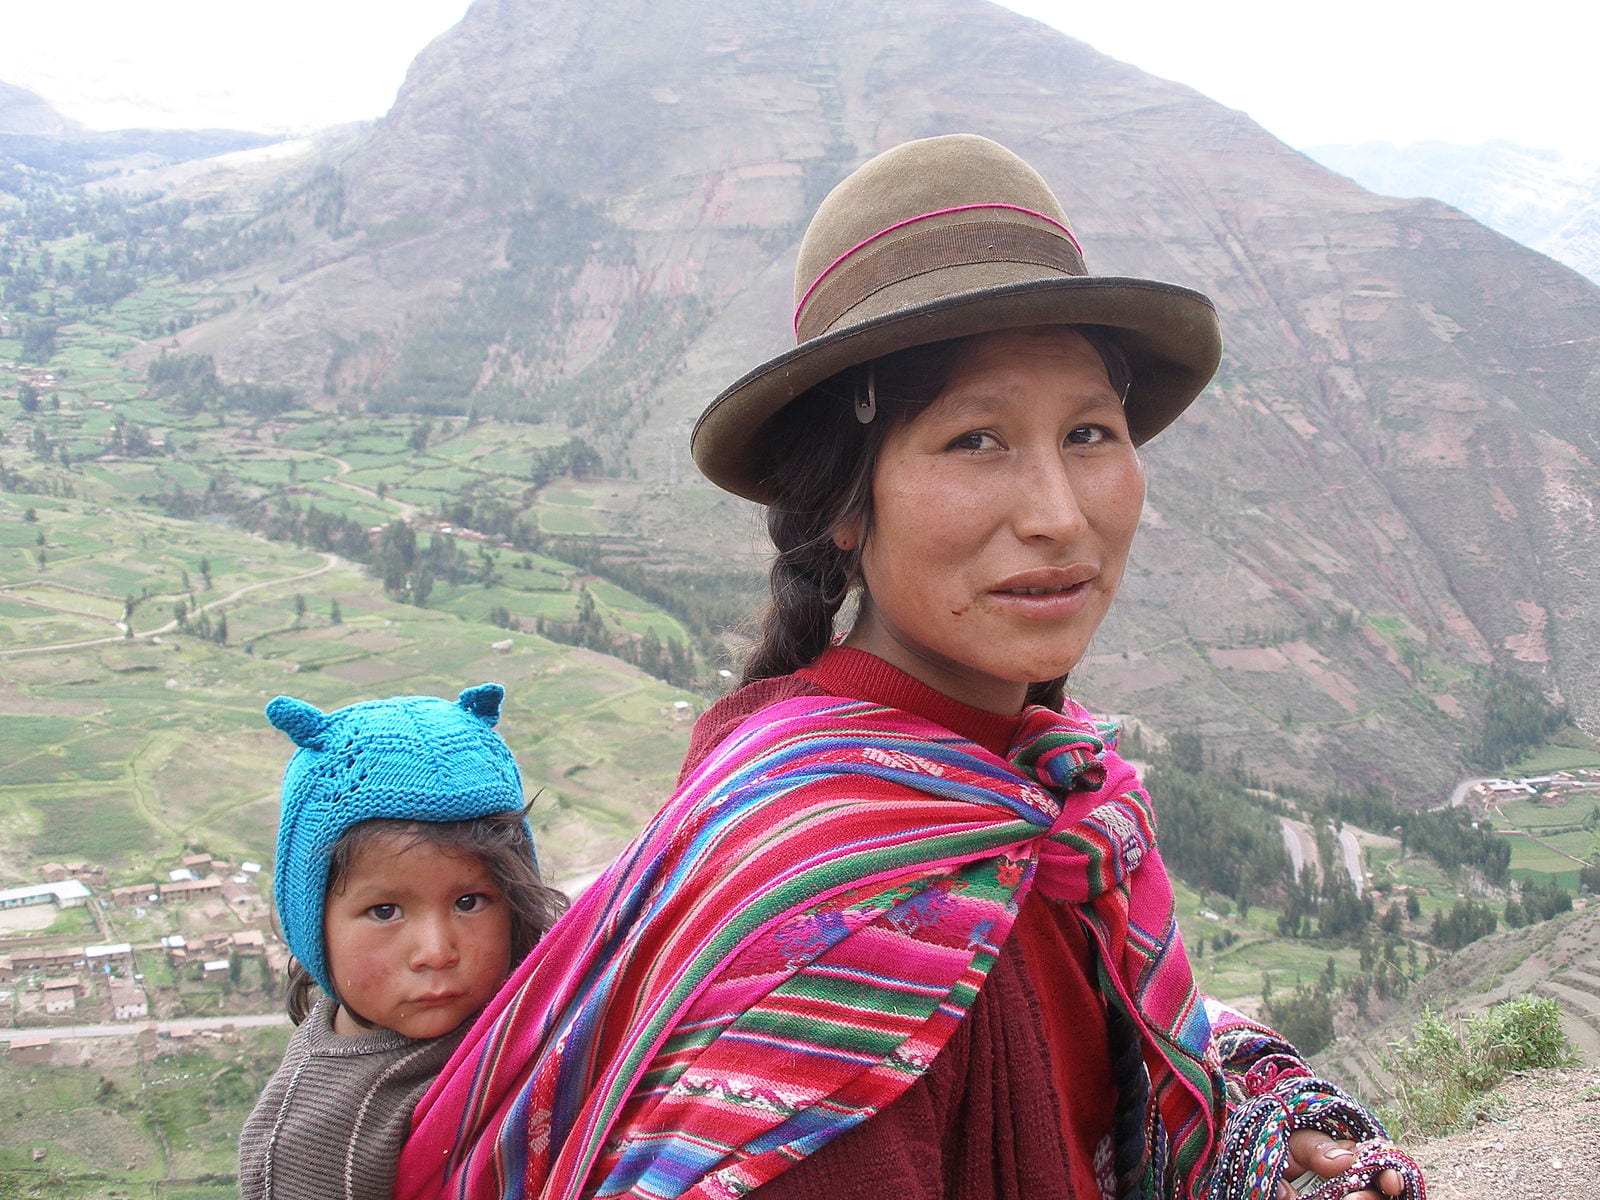 Indigenous Peruvian woman carrying her child on her back with mountains in the background